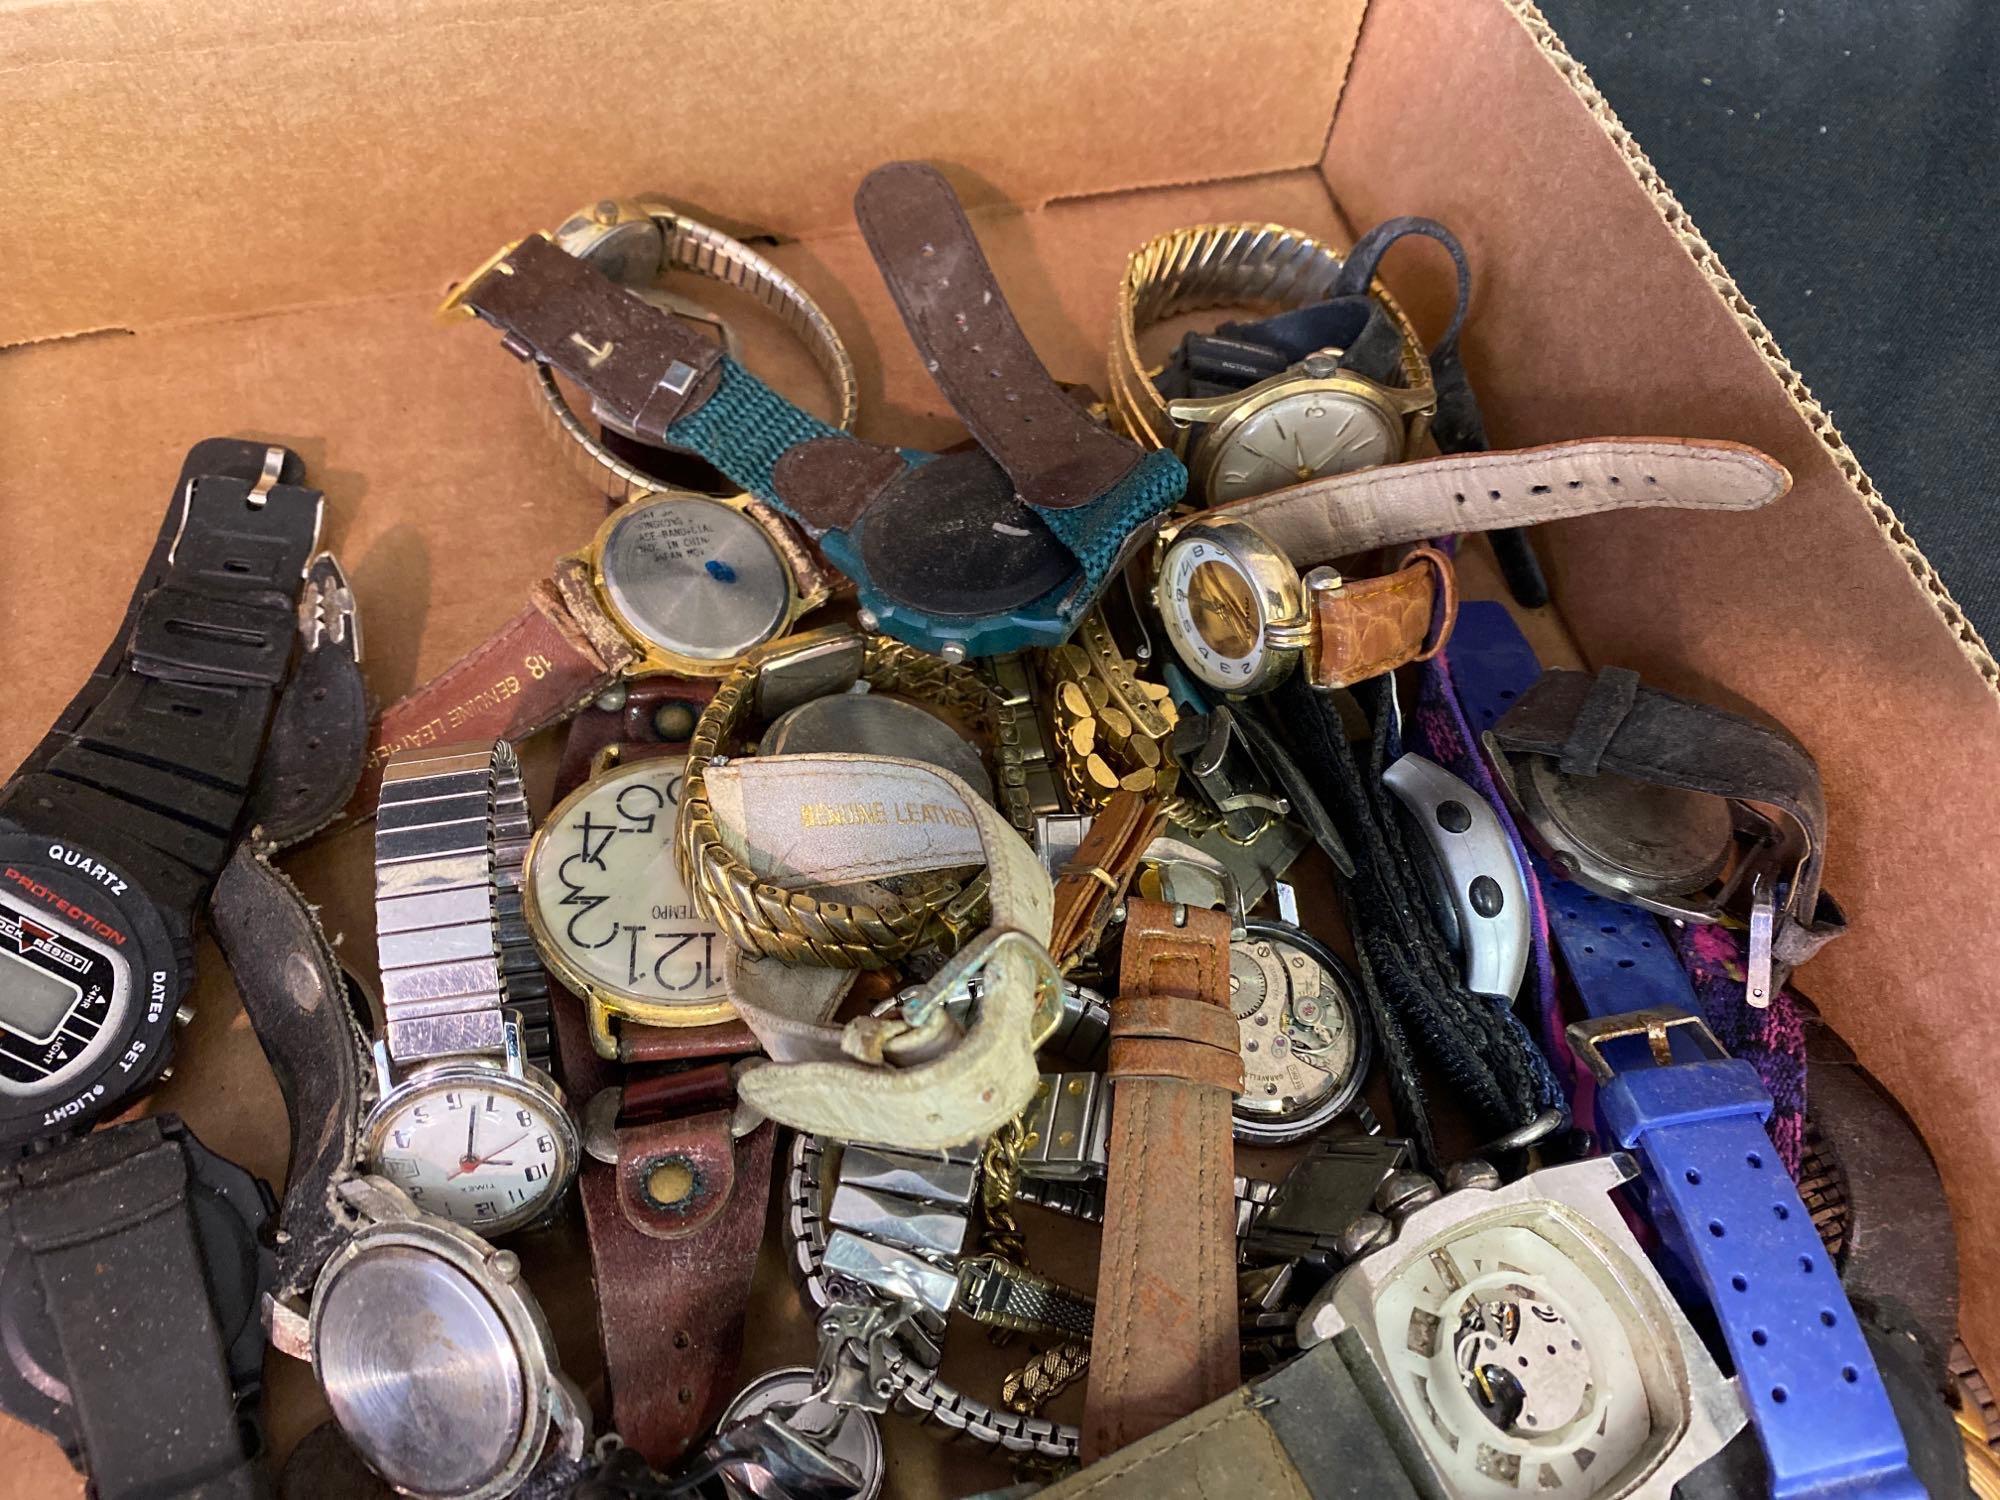 Box Full Of Wrist Watches & Parts 4lbs 4oz